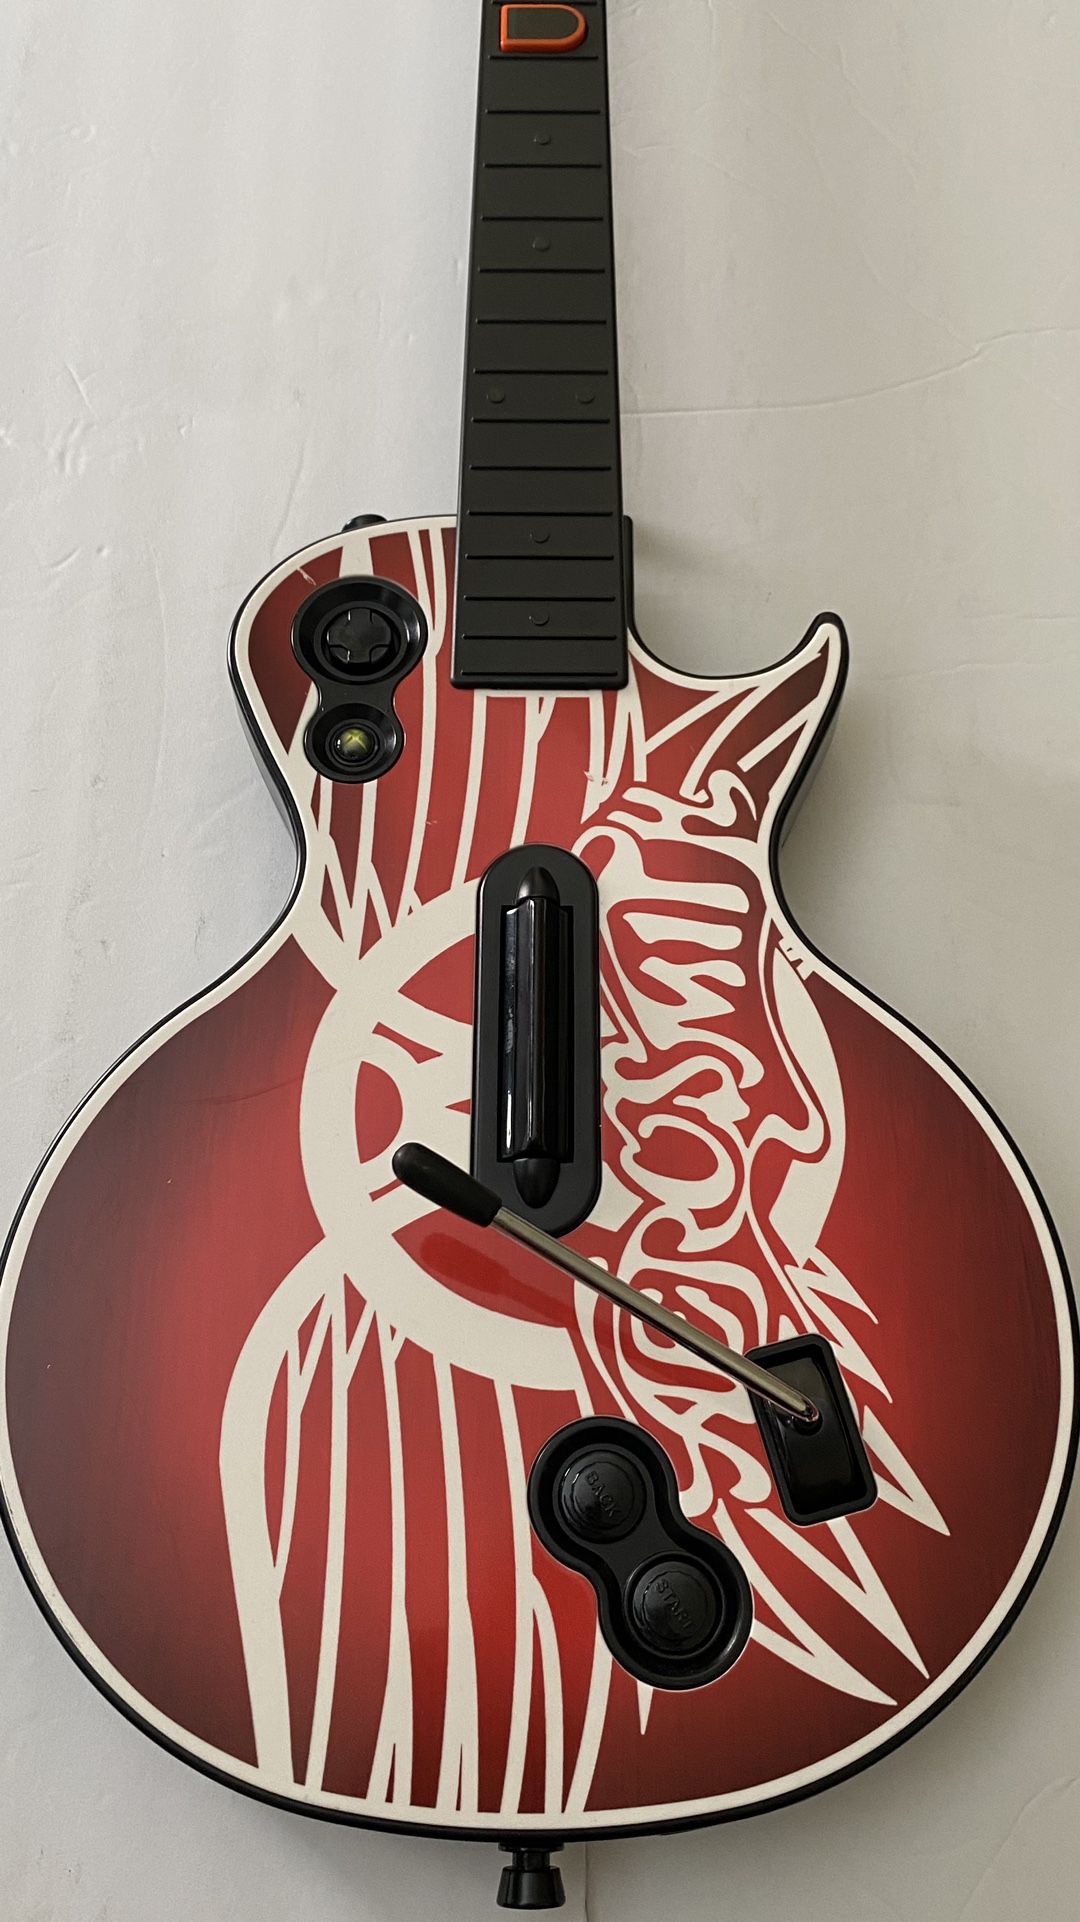 xbox 360 guitar hero les paul aerosmith wireless controller only $60 FIRM